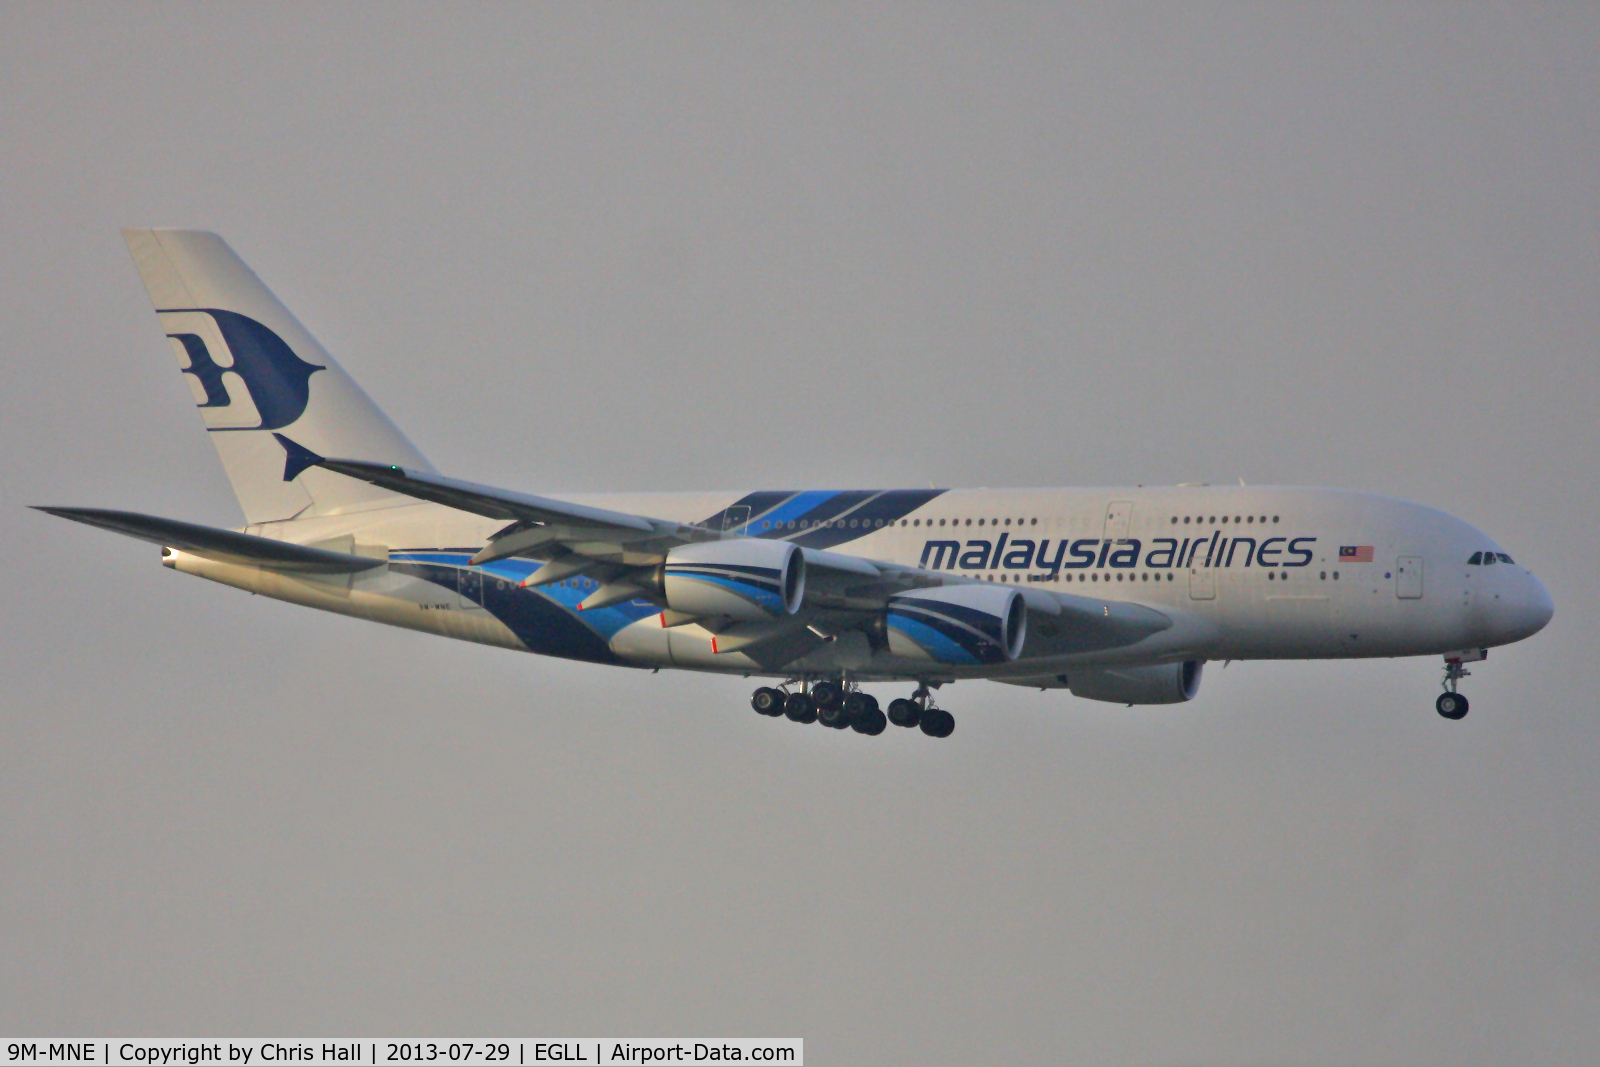 9M-MNE, 2012 Airbus A380-841 C/N 094, Malaysia Airlines